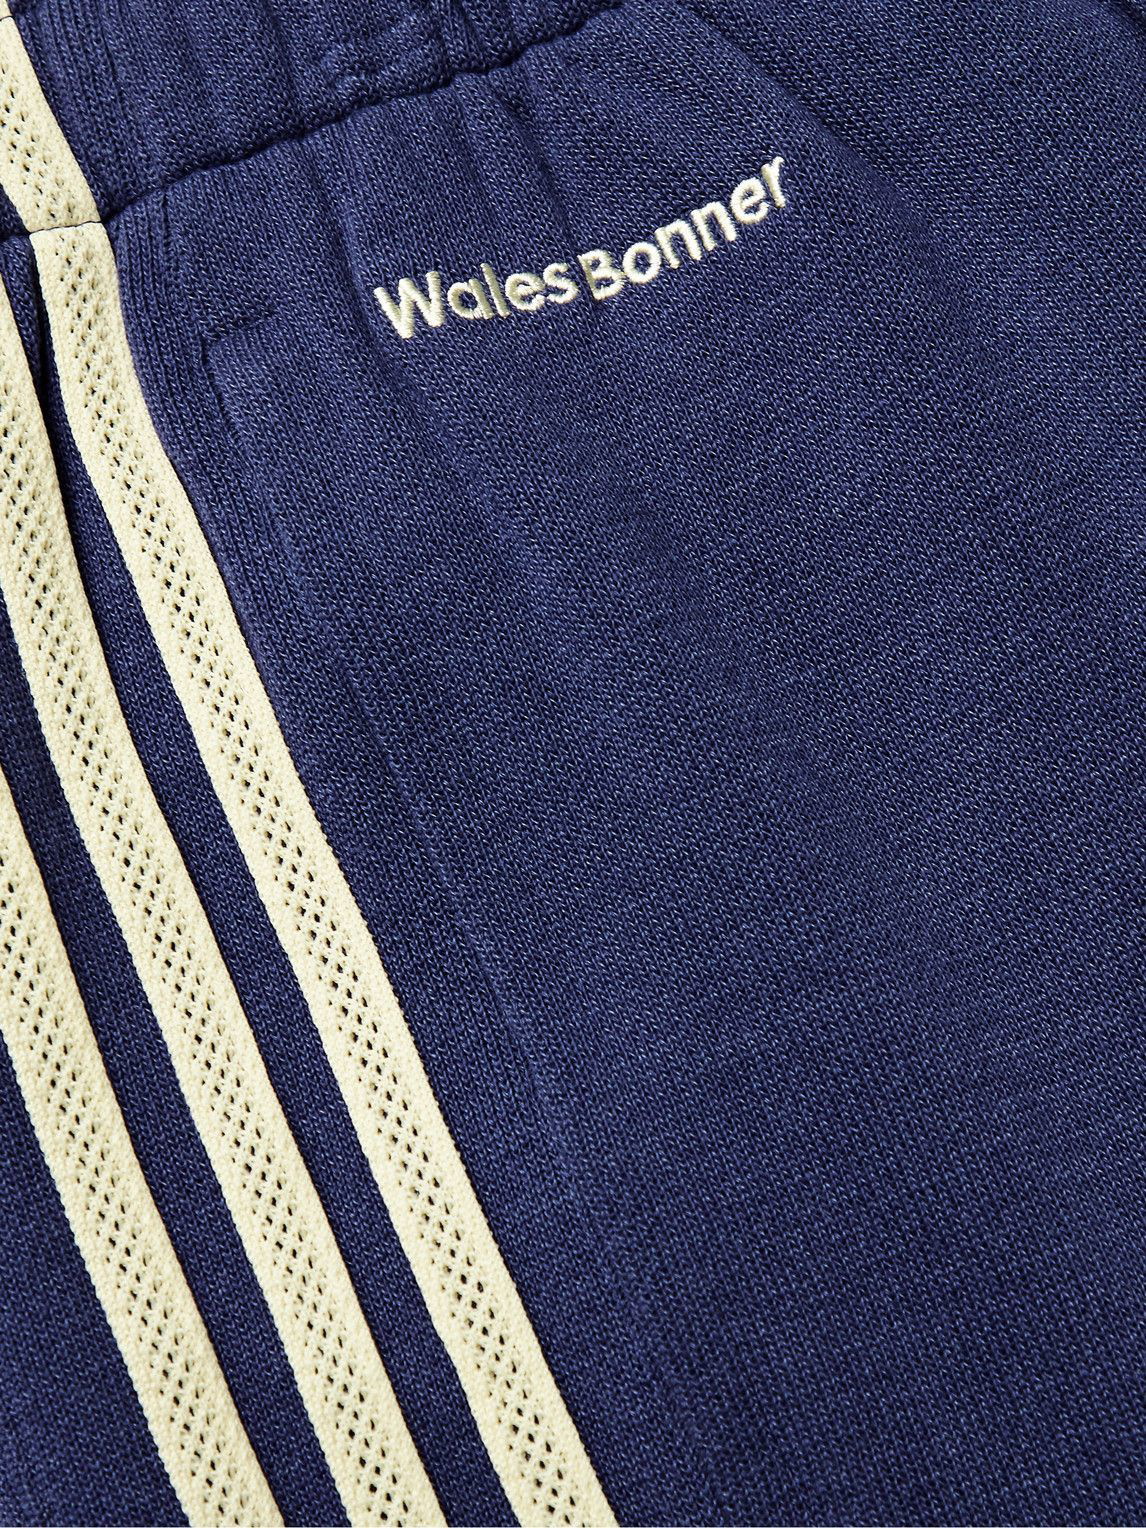 ADIDAS ORIGINALS BY WALES BONNER Striped tech-jersey track pants